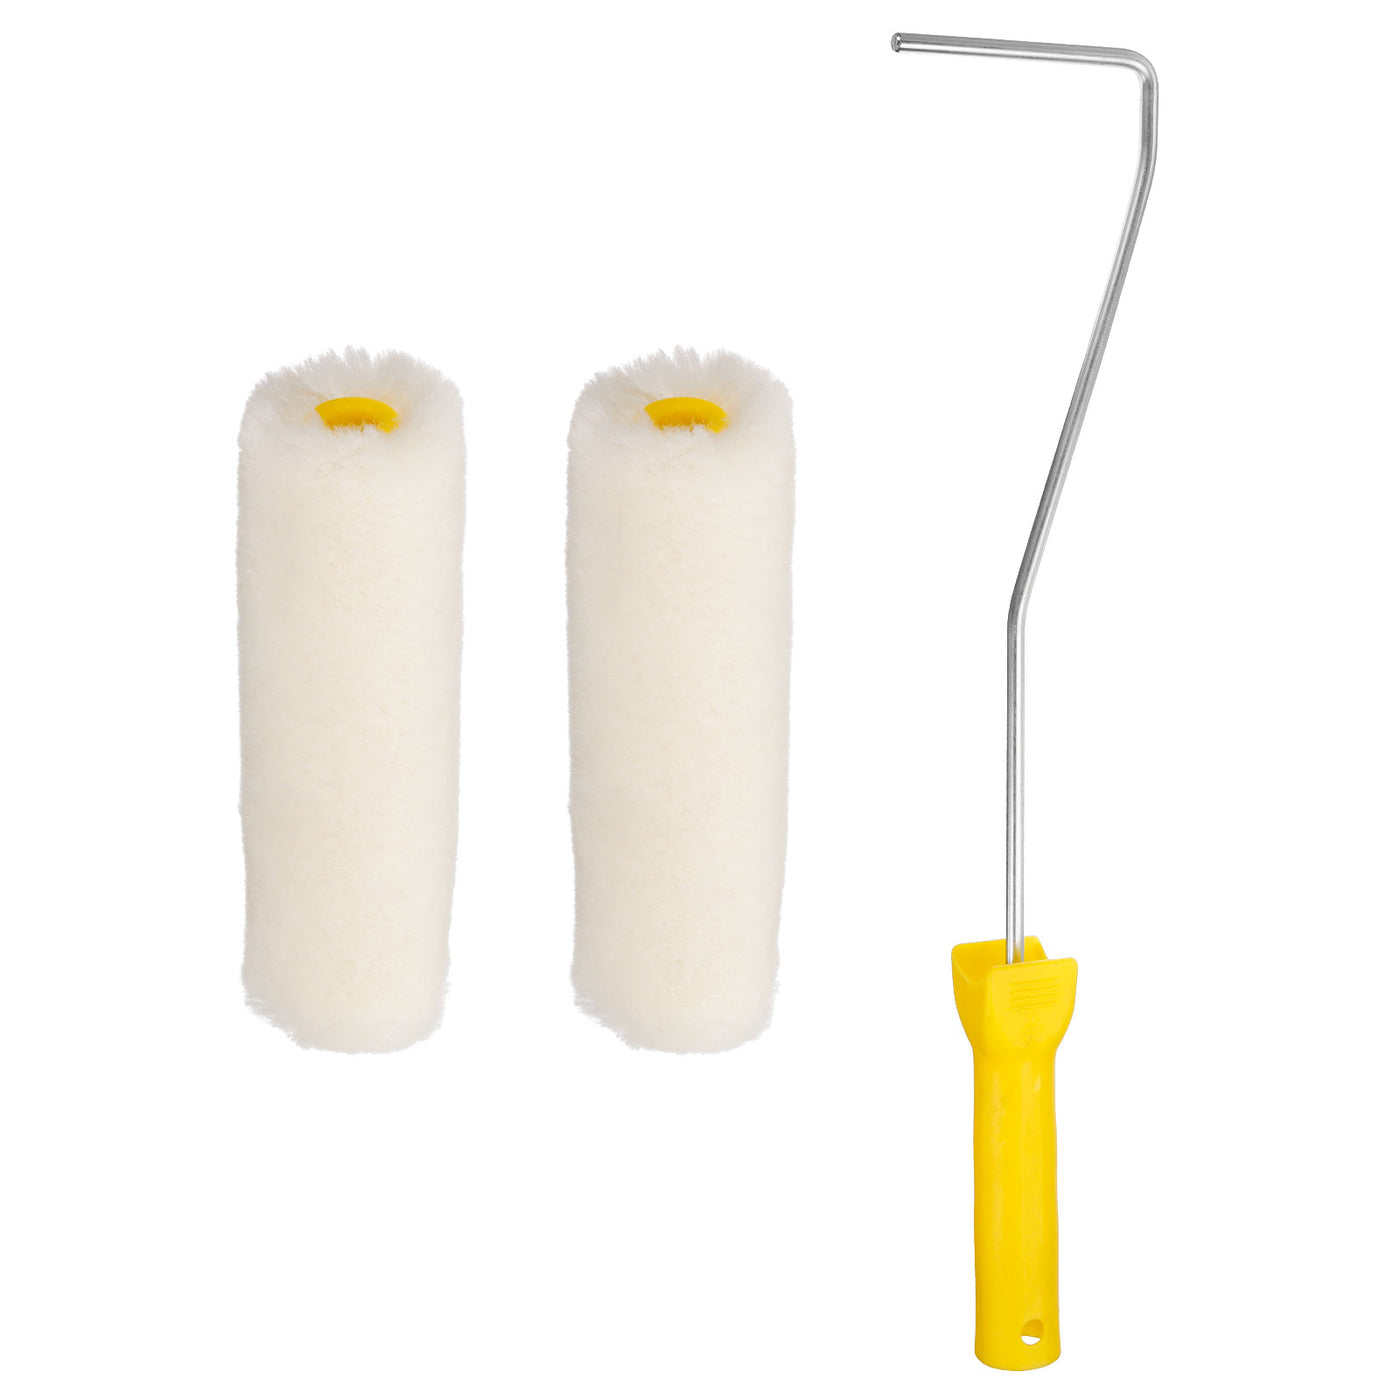 uxcell Uxcell 3Pcs Paint Roller Kit, 2Pcs 9mm Thickness 4" Wool Roller Covers and 16" Frame